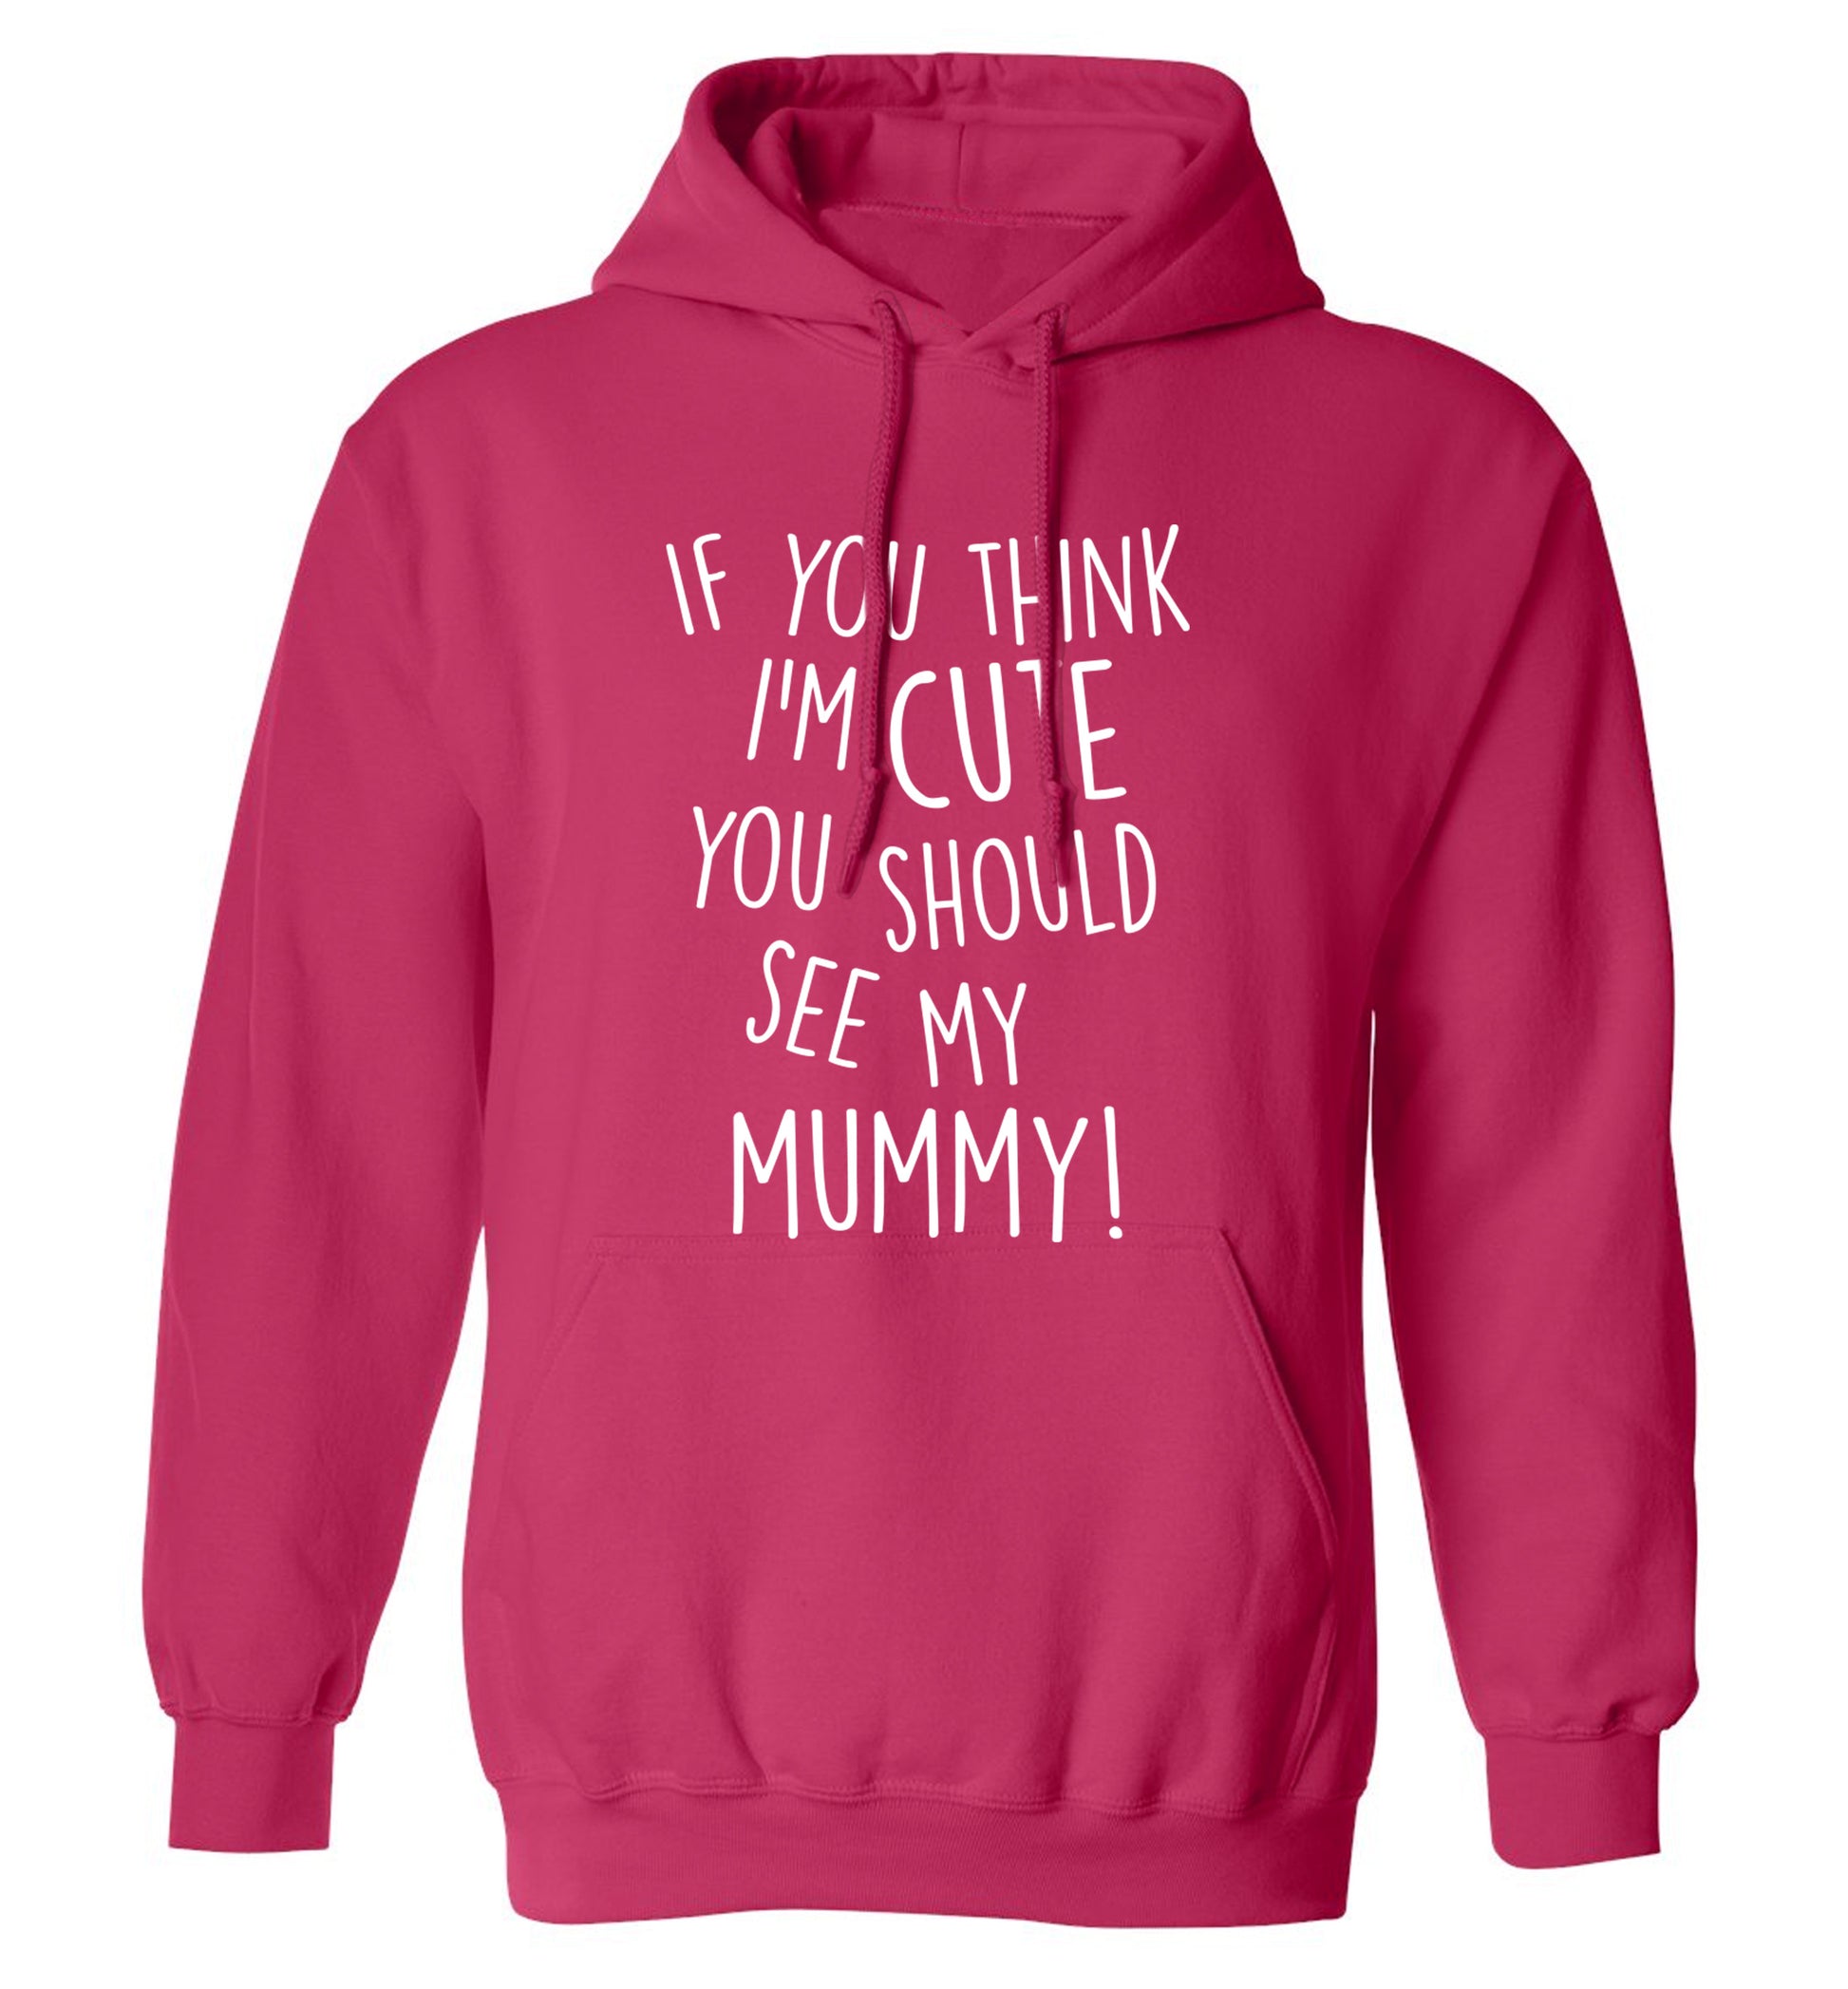 If you think I'm cute you should see my mummy adults unisex pink hoodie 2XL